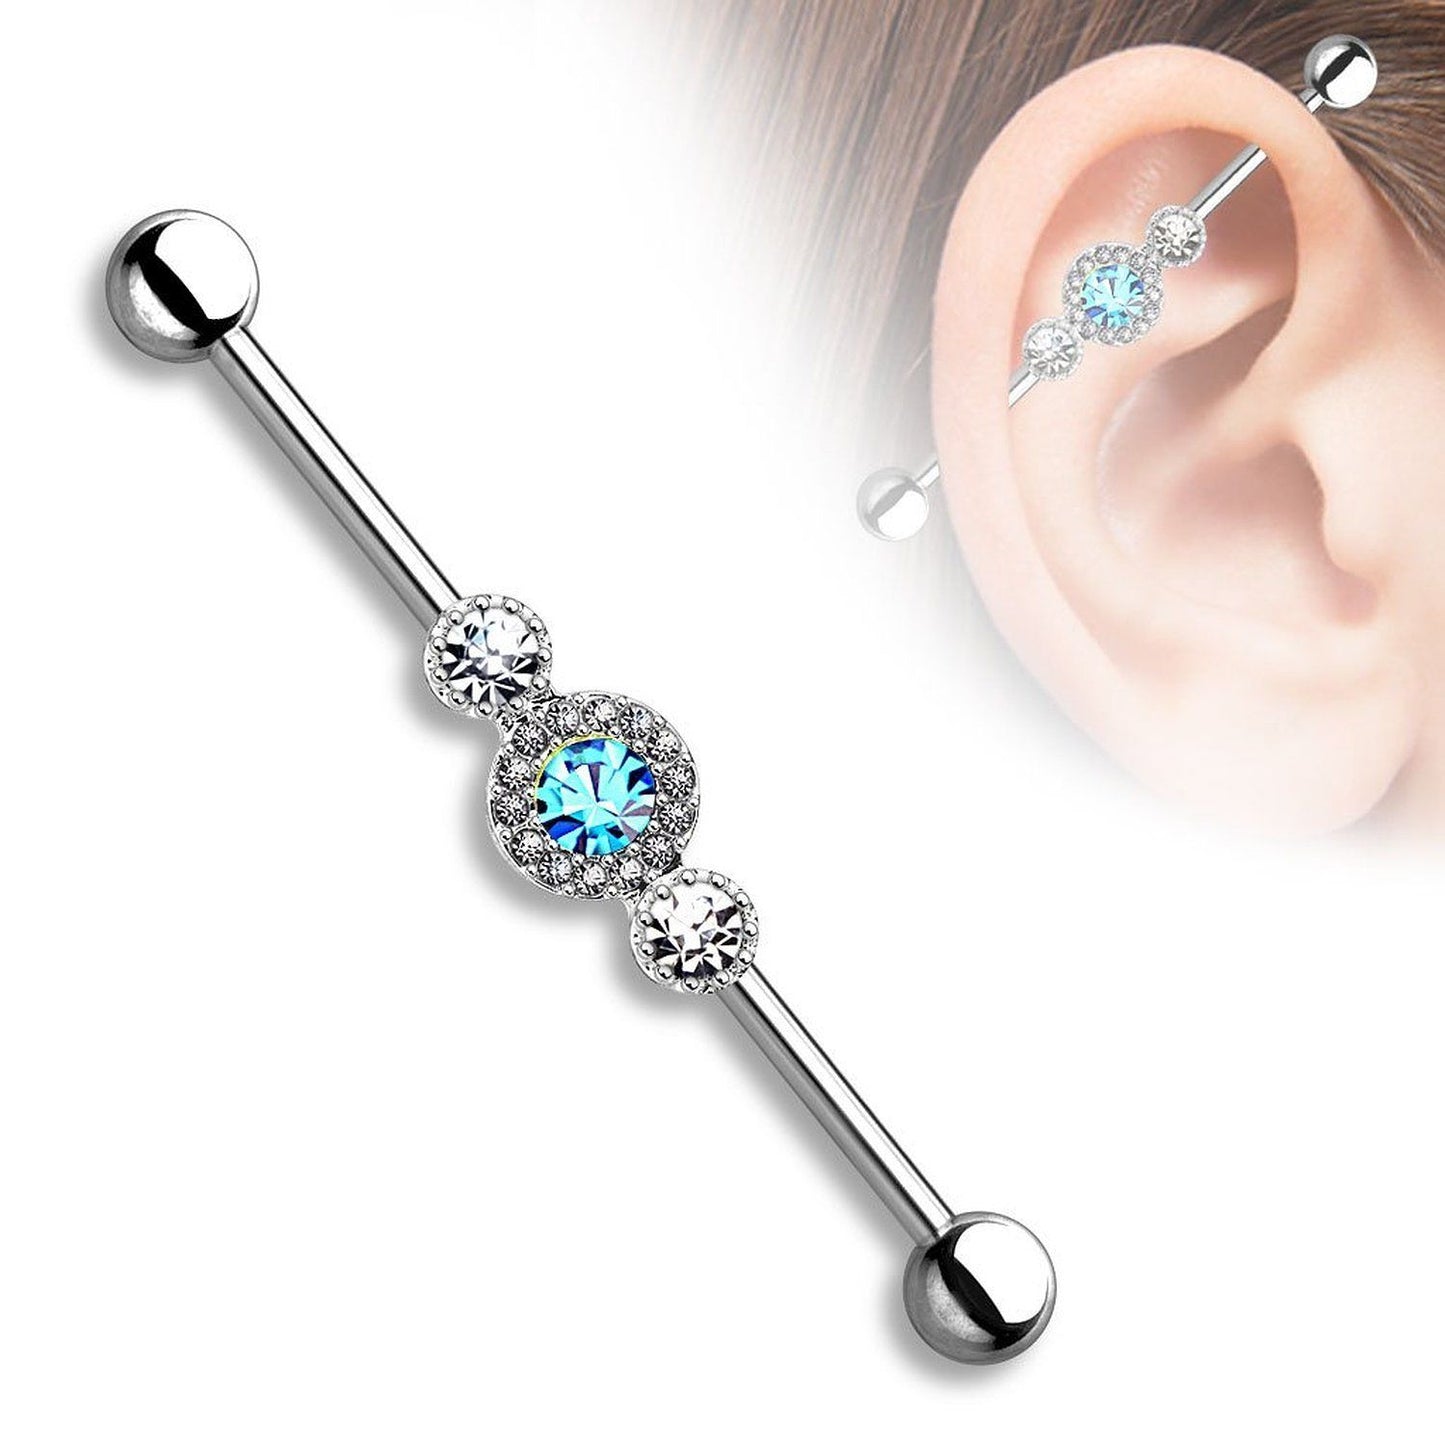 Industrial Barbell Three CZ Centered Multi Paved Circle 14ga 316L Surgical Steel